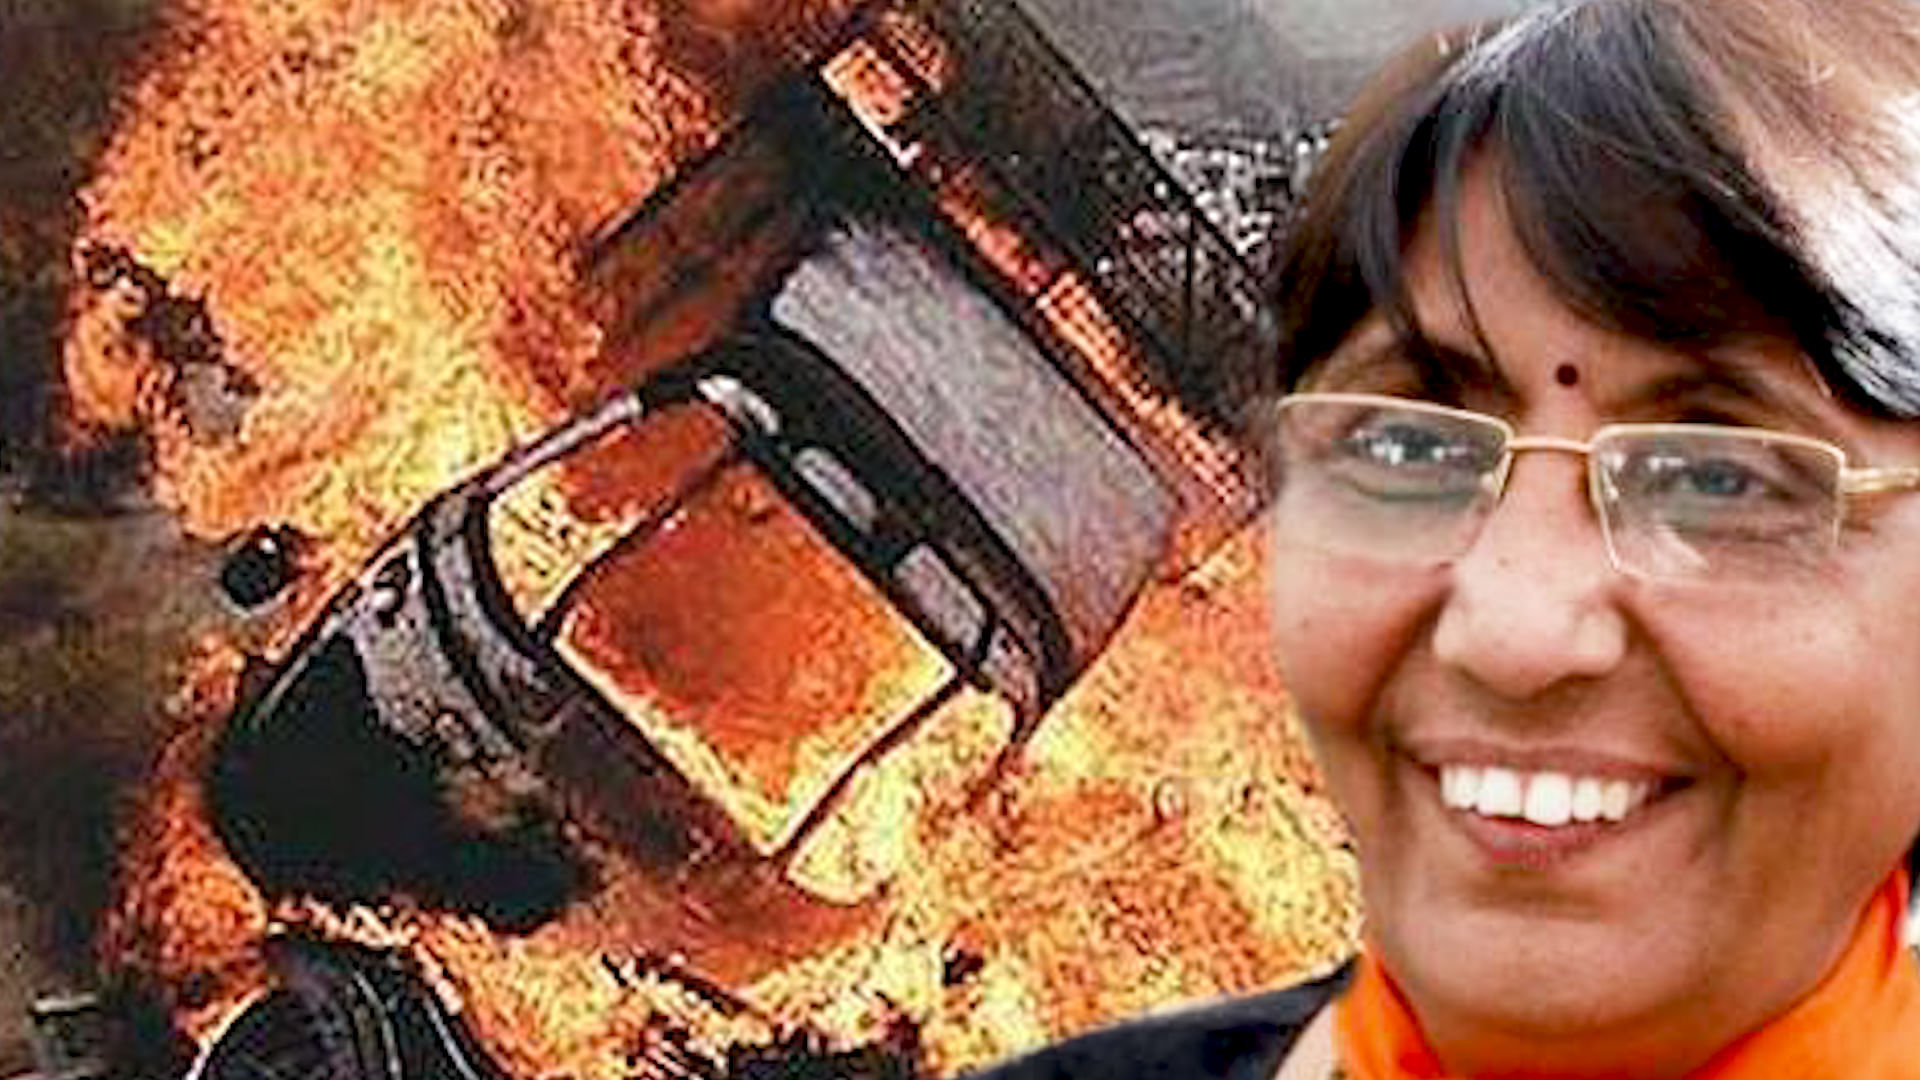 The Gujarat High Court on Friday acquitted former BJP minister Maya Kodnani and upheld the conviction of ex-Bajrang Dal leader Babu Bajrangi in the 2002 Naroda Patiya riot case.